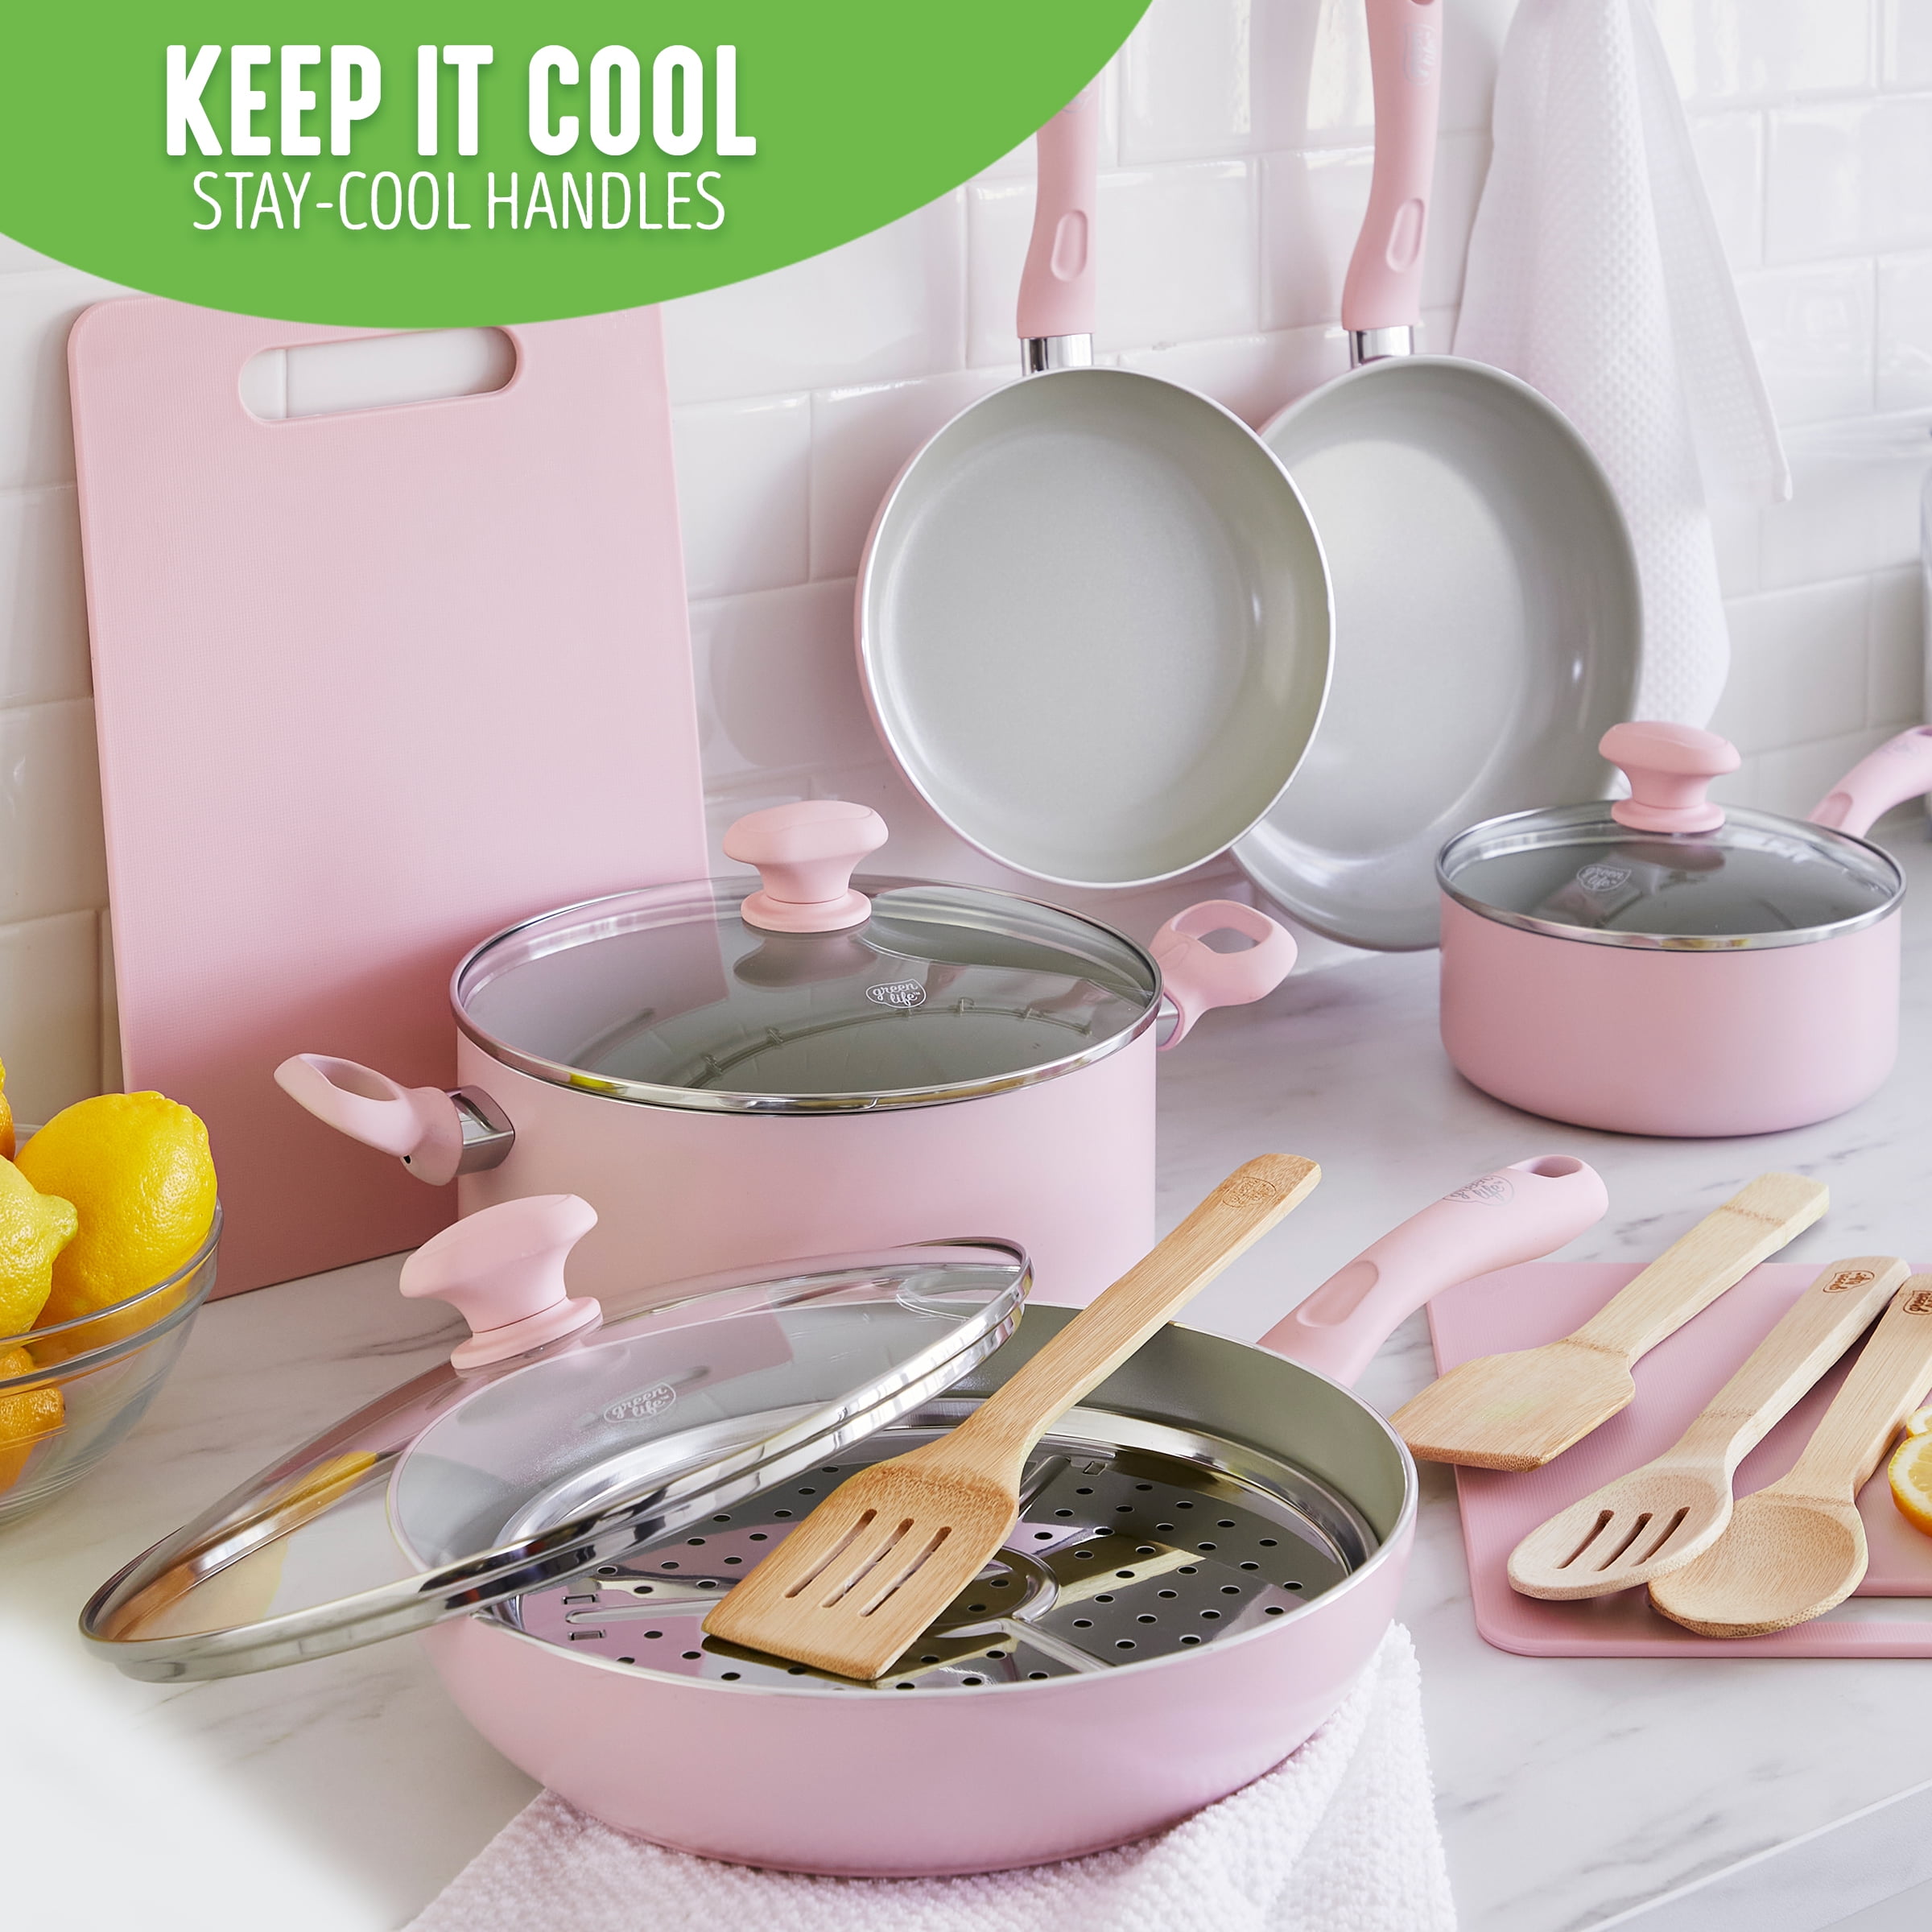 Give your Kitchen the Feminine Touch with these Cool Pink Pots and Pans